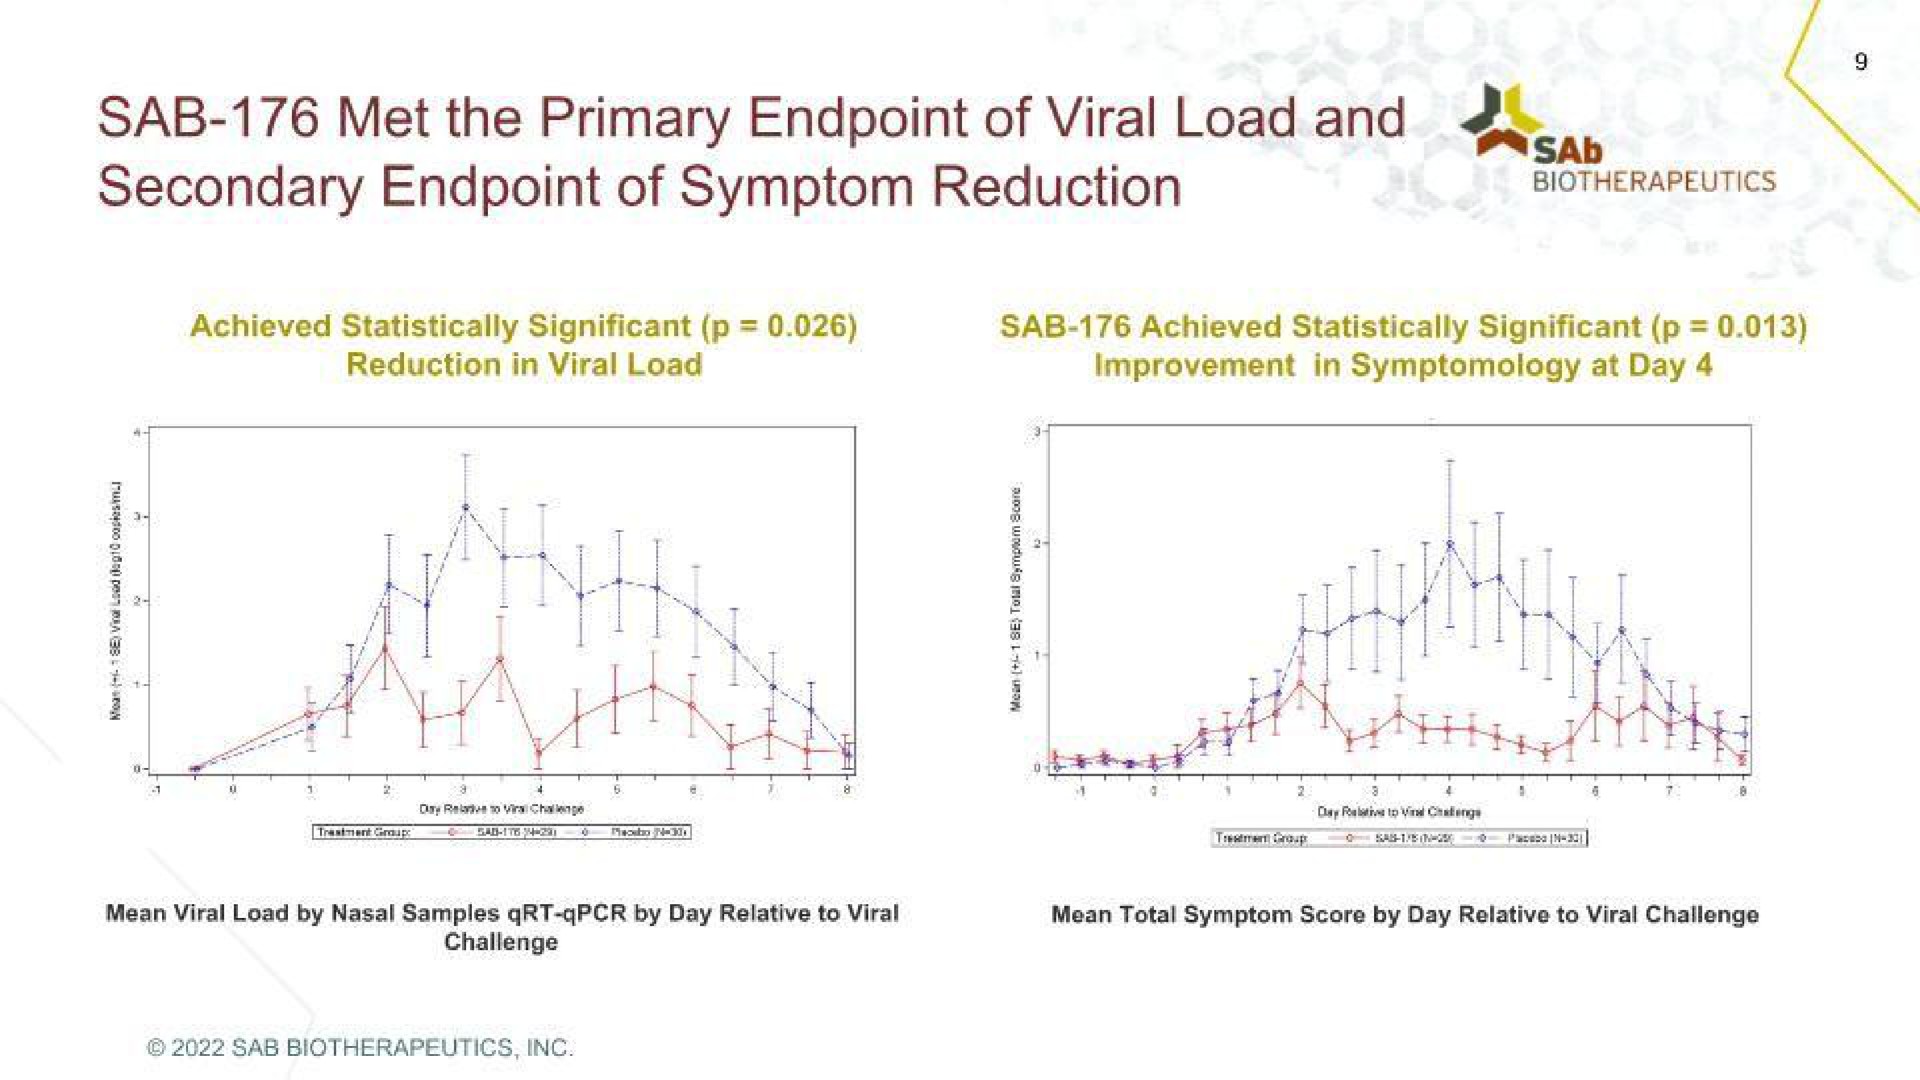 sab met the primary of viral load and secondary of symptom reduction i win | SAB Biotherapeutics